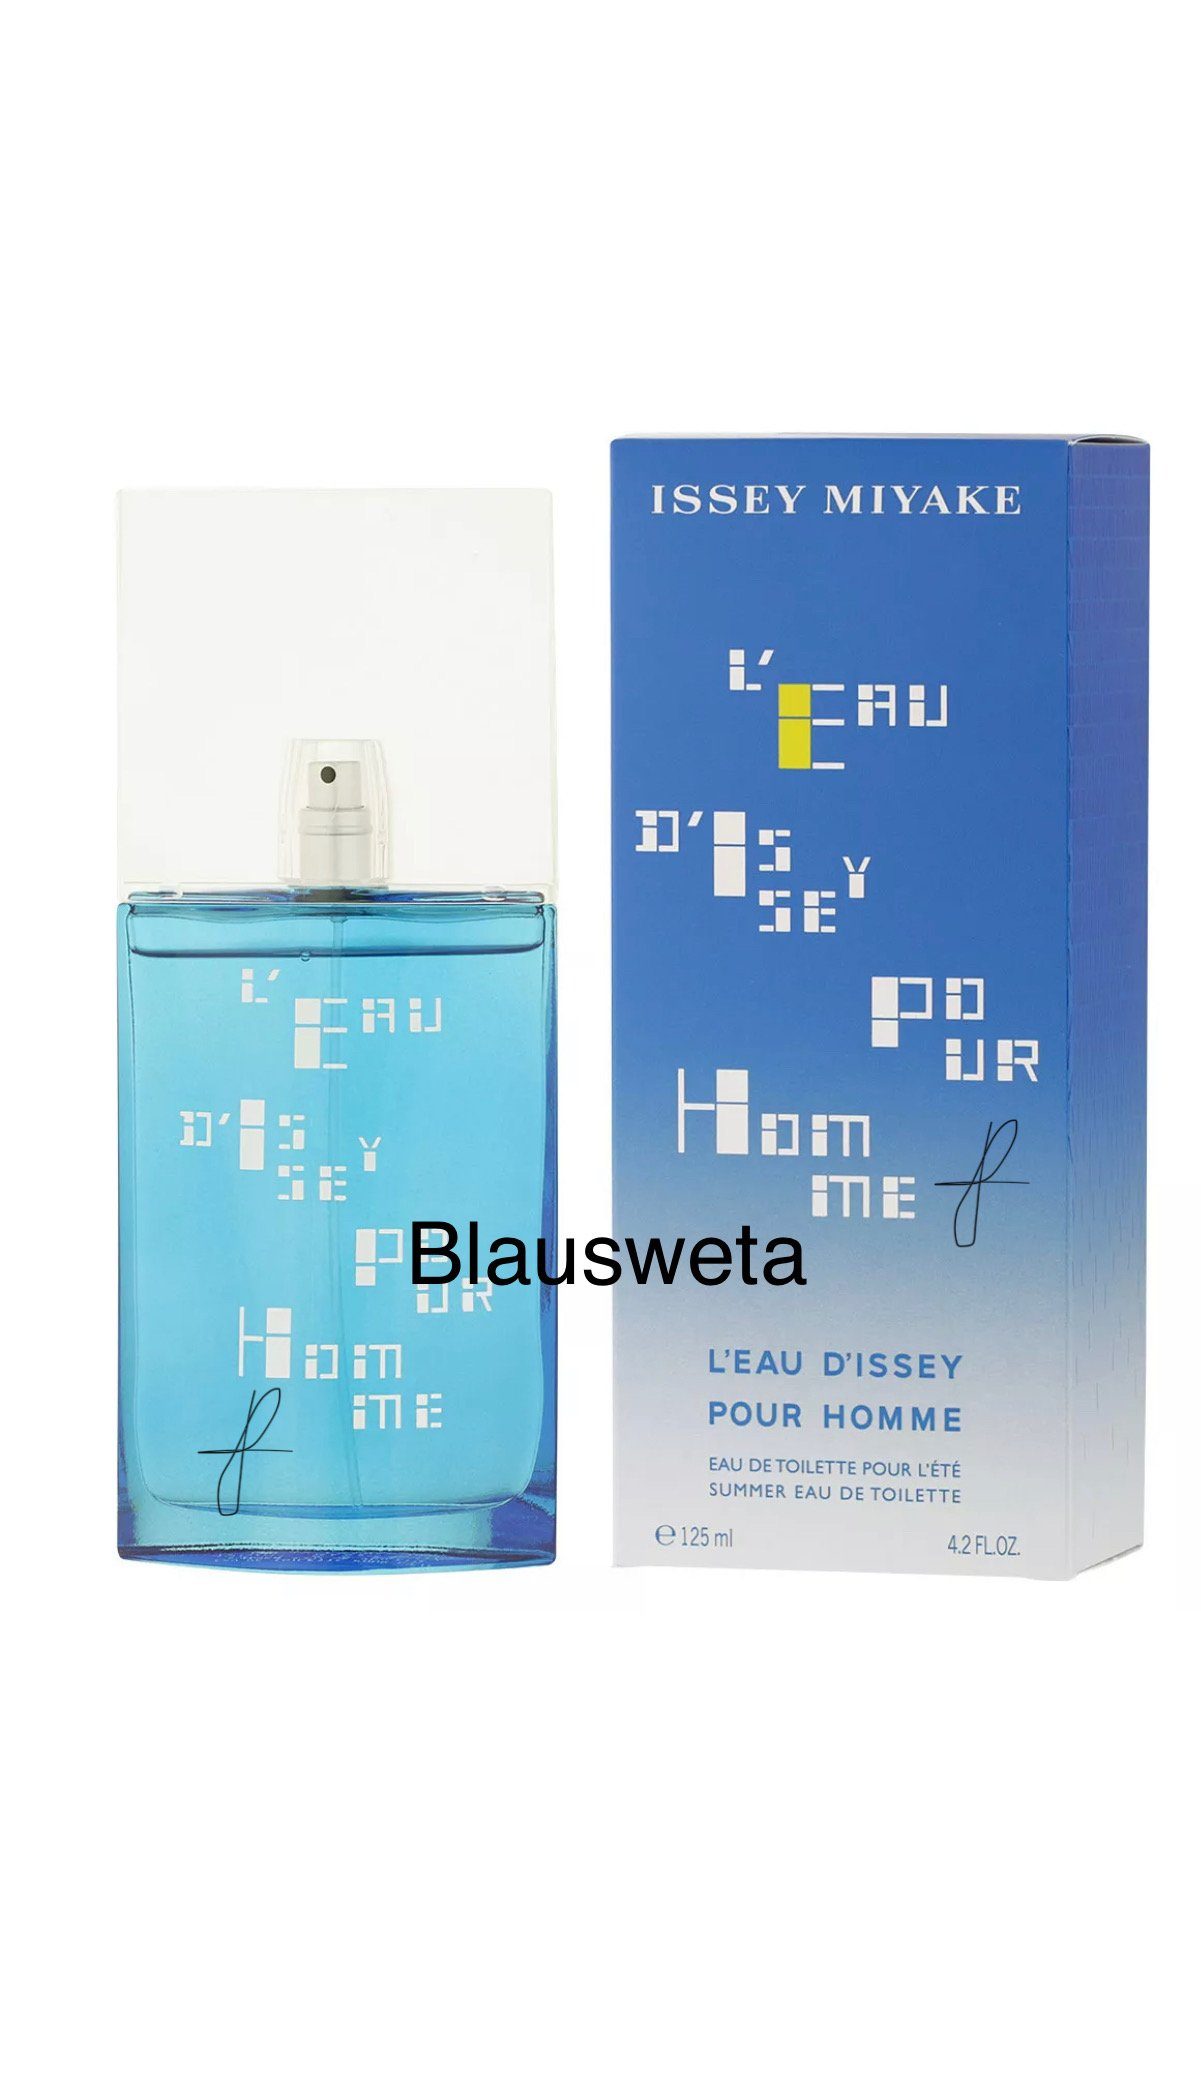 Toilette Eau Miyake Issey Issey Homme 2017 Pour de L Summer eau Issey Miyake D